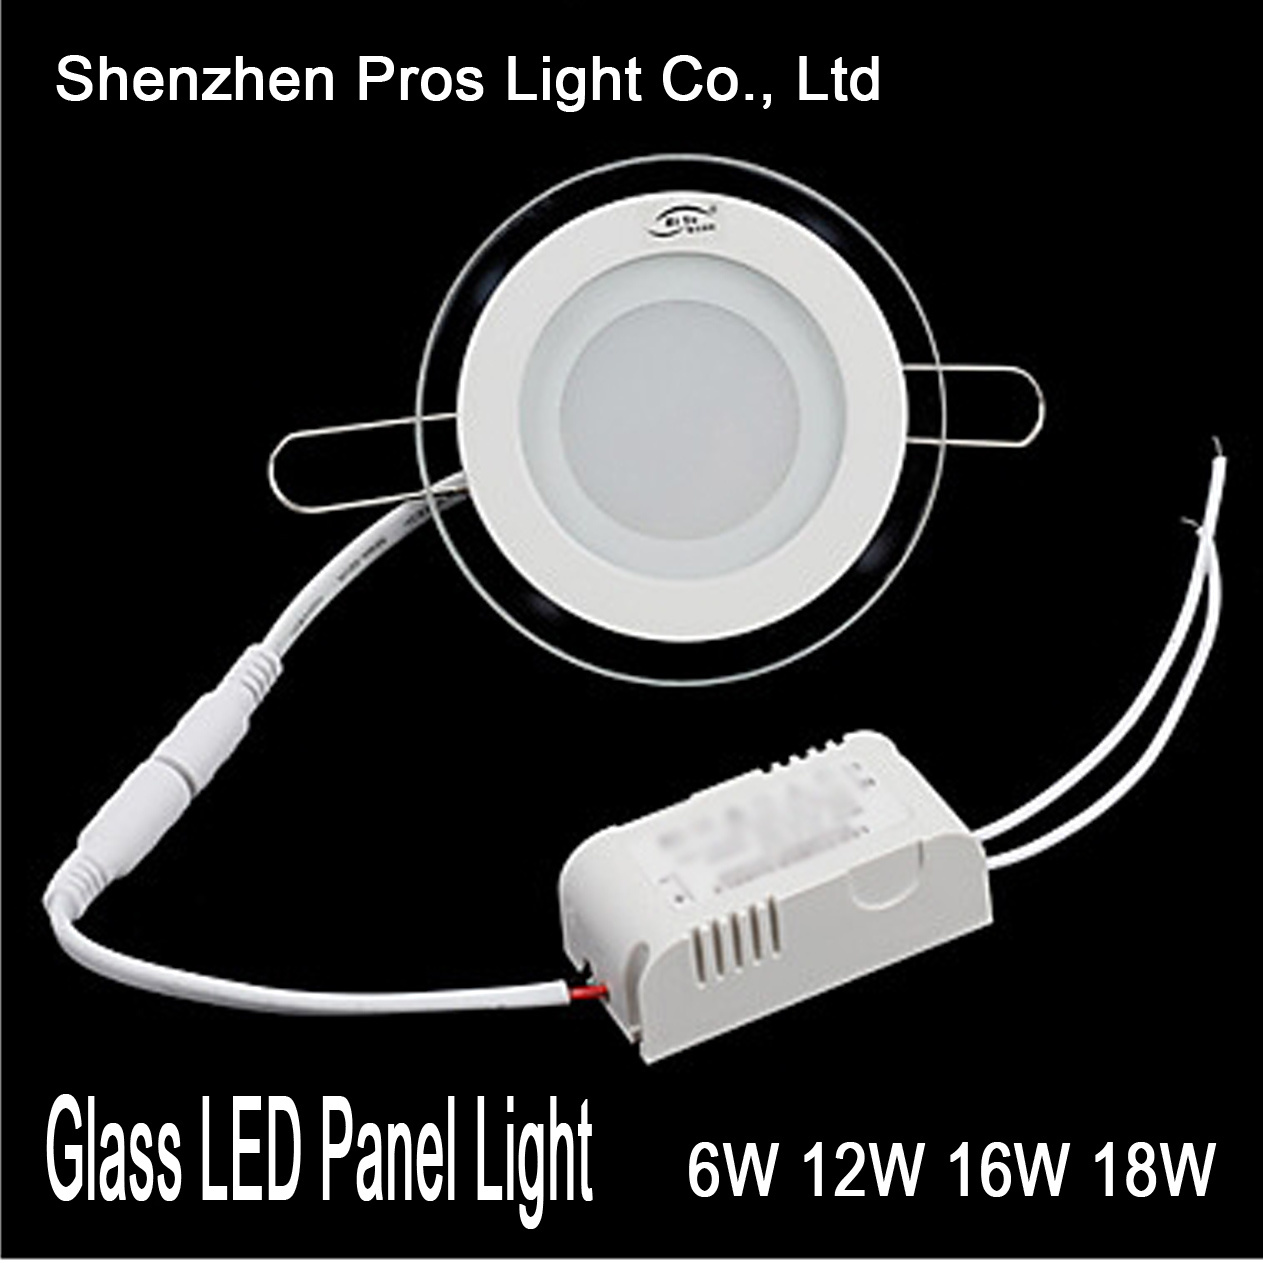 Glass LED Panel Light 6W Recessed for Ceiling Lamp